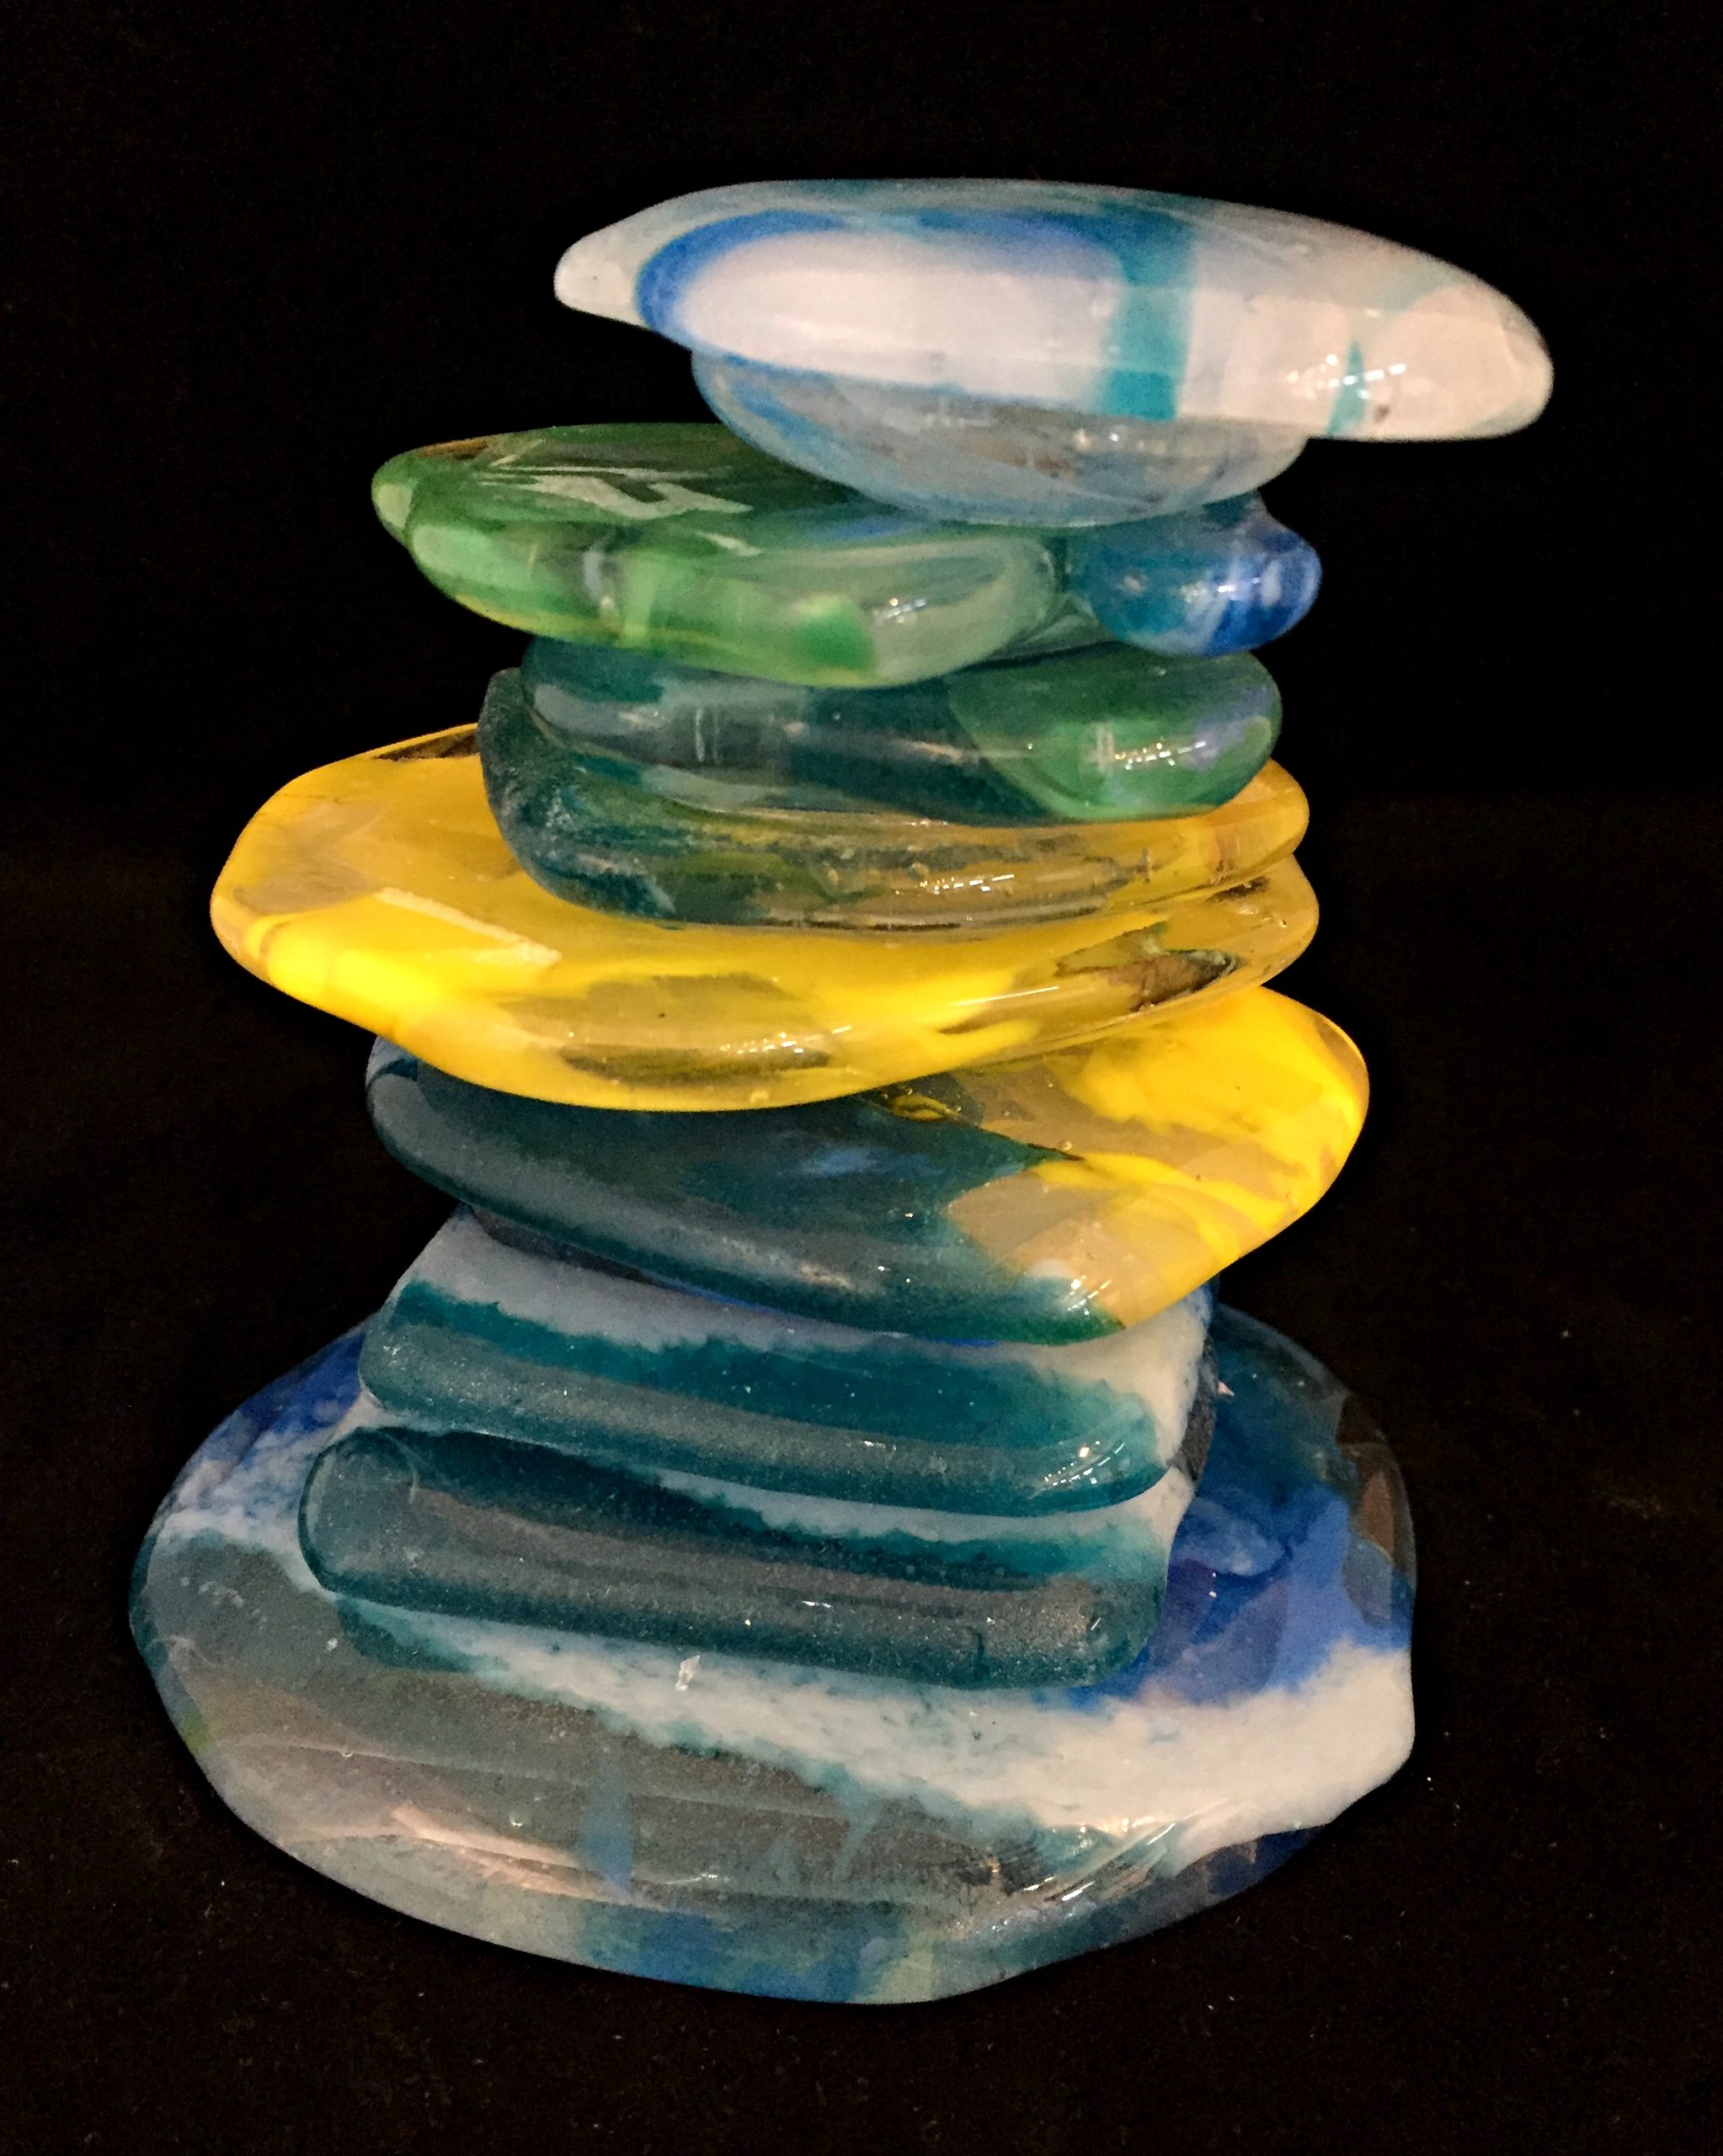 Rocky Mountain Cairn 50, cast glass sculpture by Heather Cuell | Effusion Art Gallery + Cast Glass Studio, Invermere BC